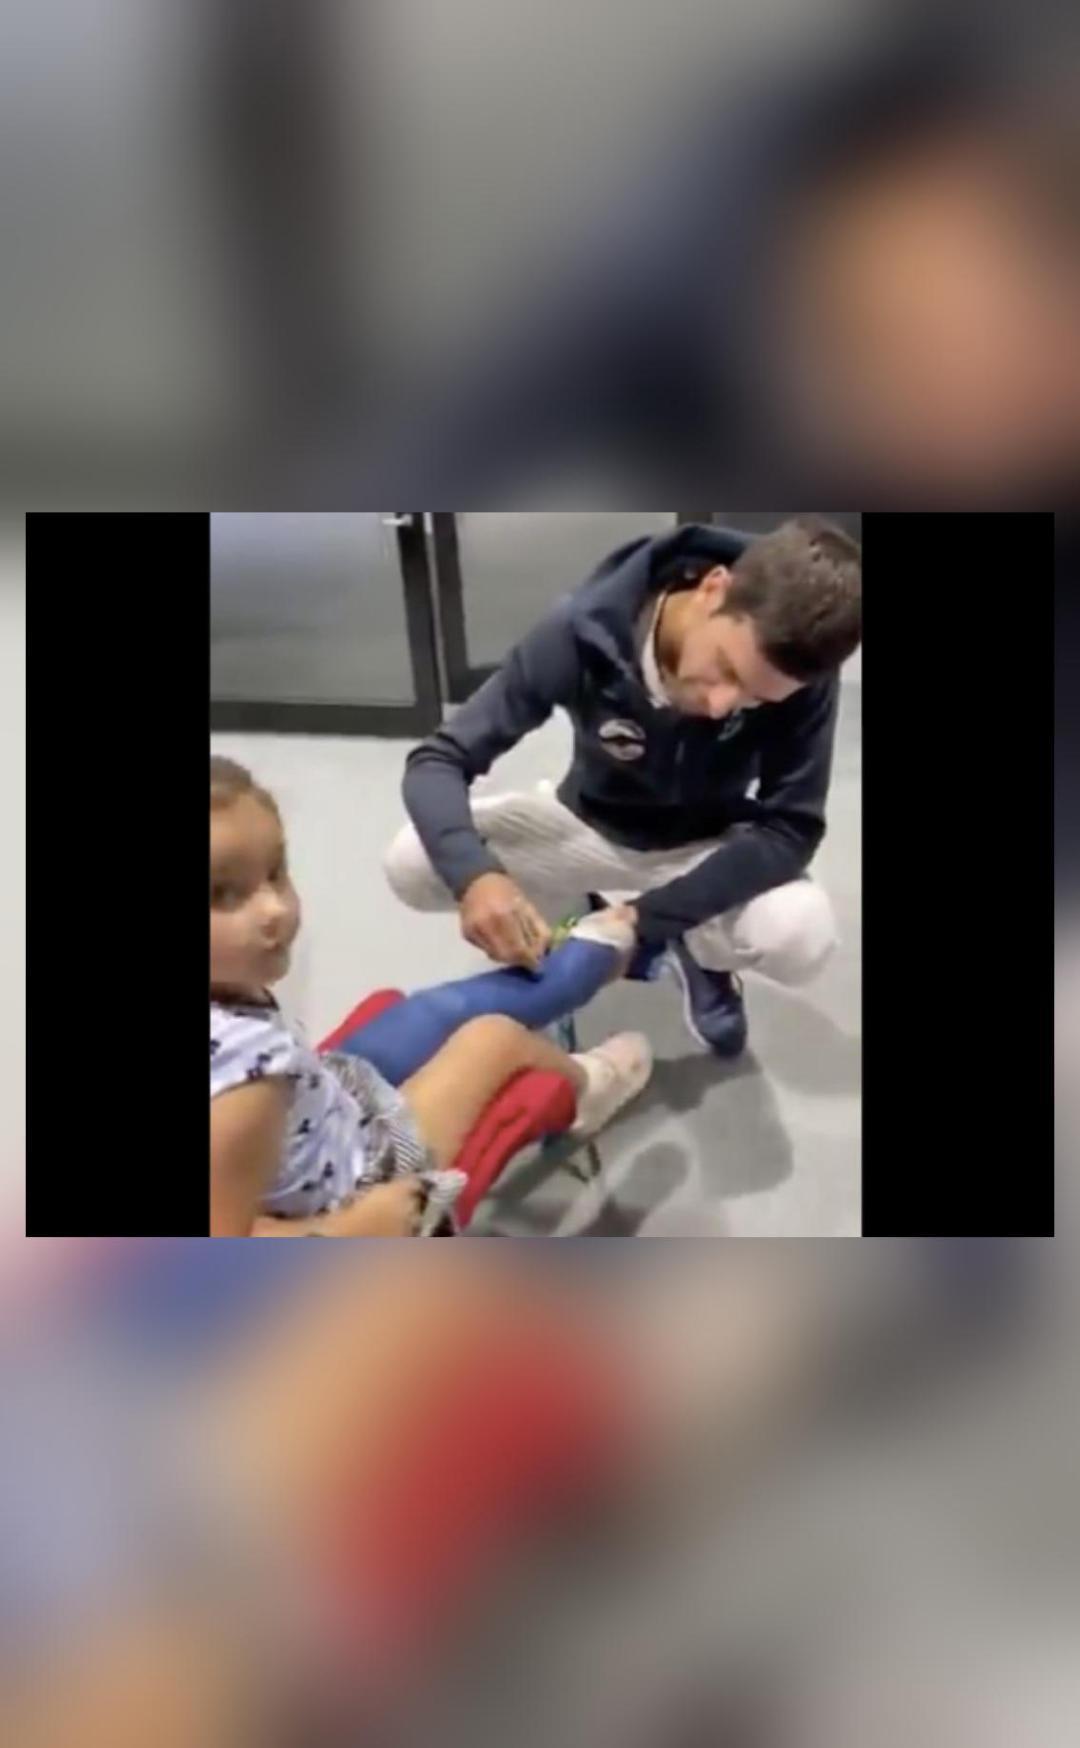 Video shows Djokovic drawing 'duck' for young fan with broken leg